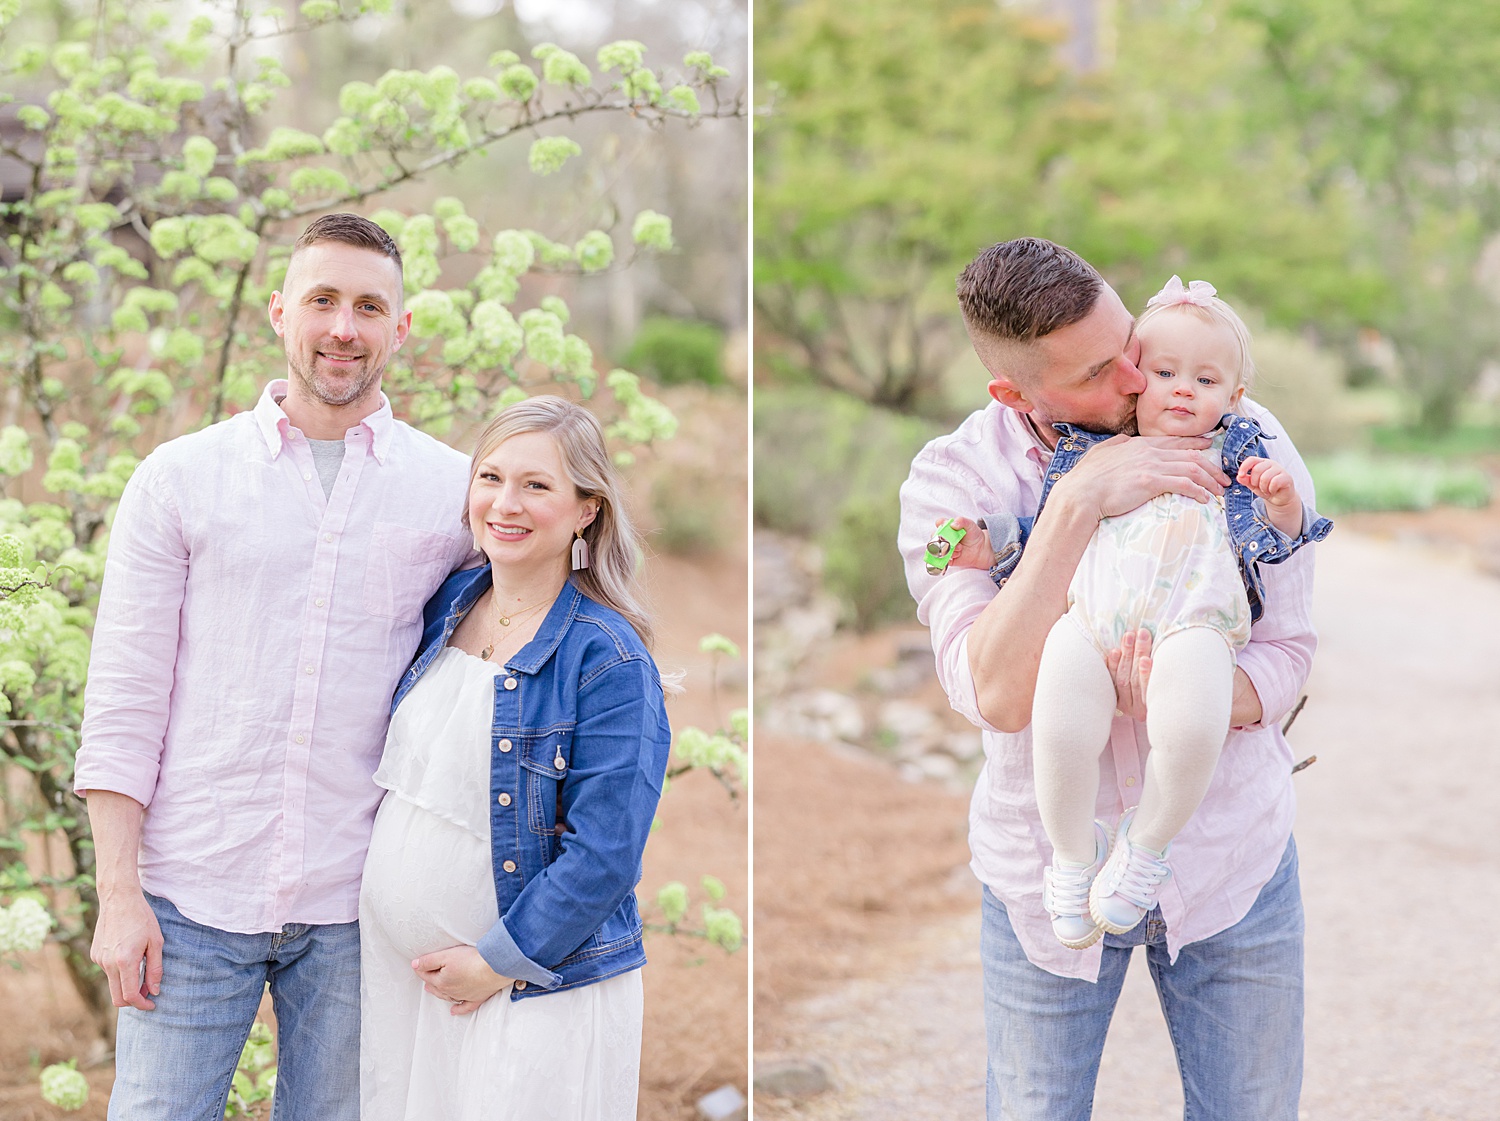 Spring Botanical Garden Maternity portraits of soon to be family of four  